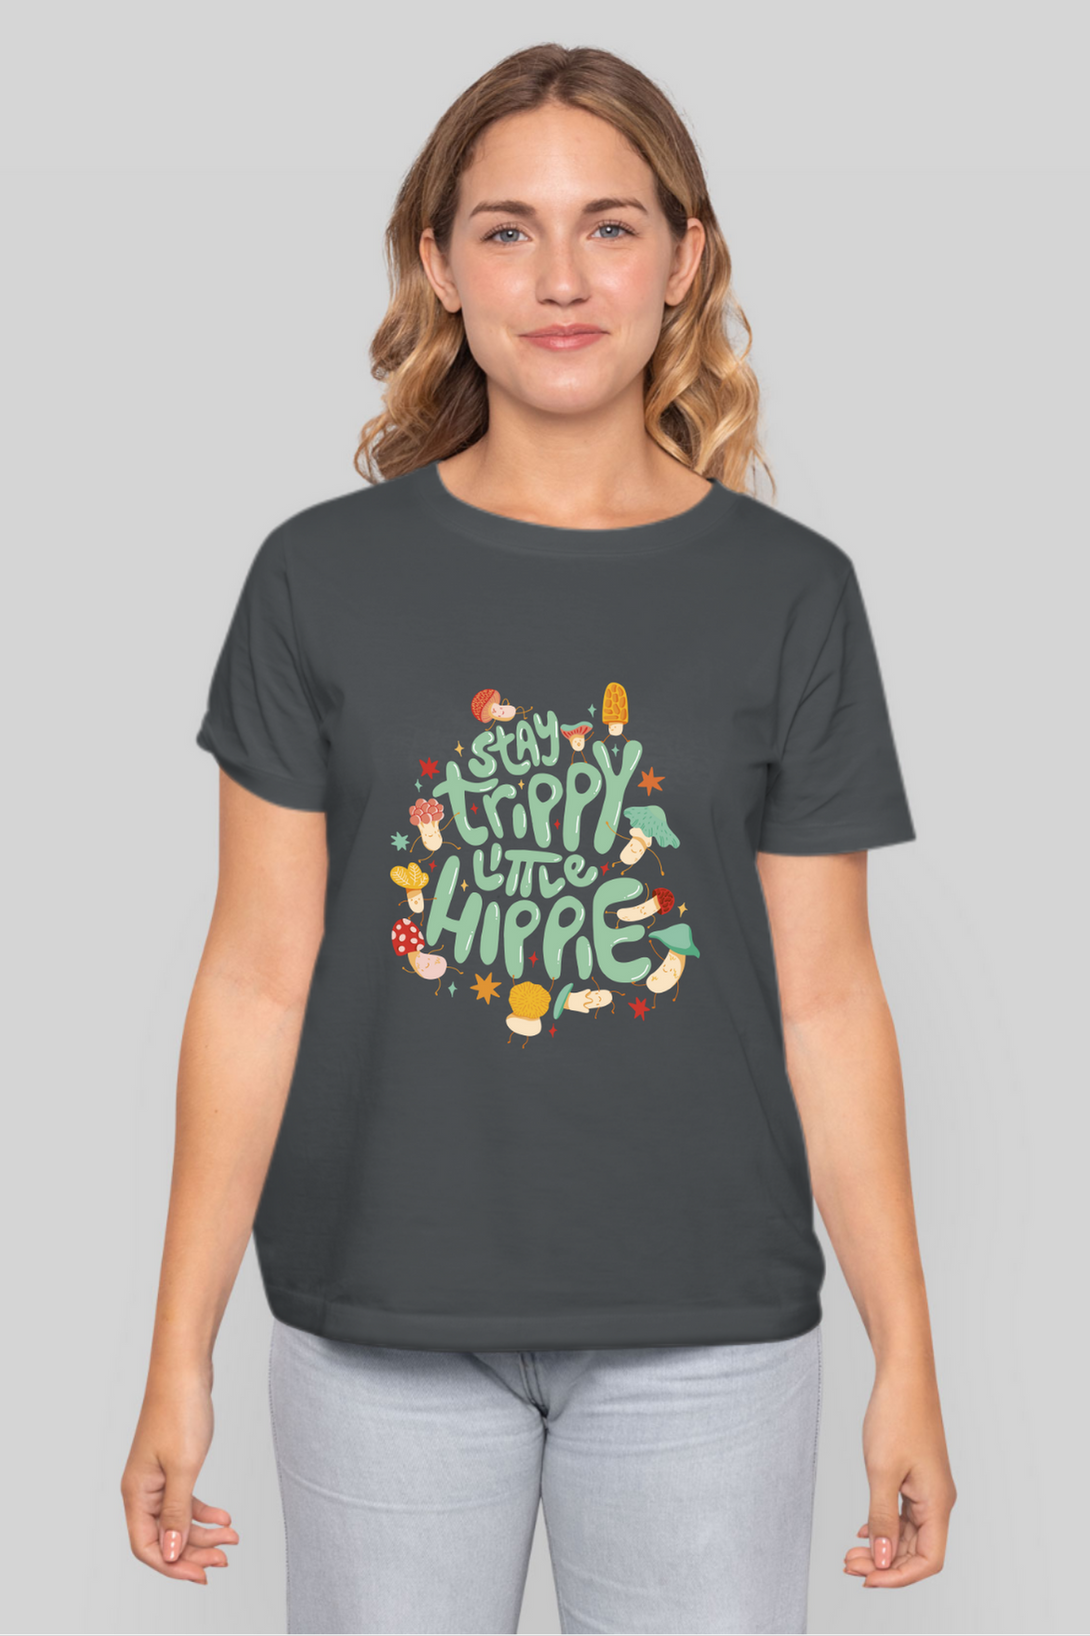 Stay Trippy Little Hippie Printed T-Shirt For Women - WowWaves - 13